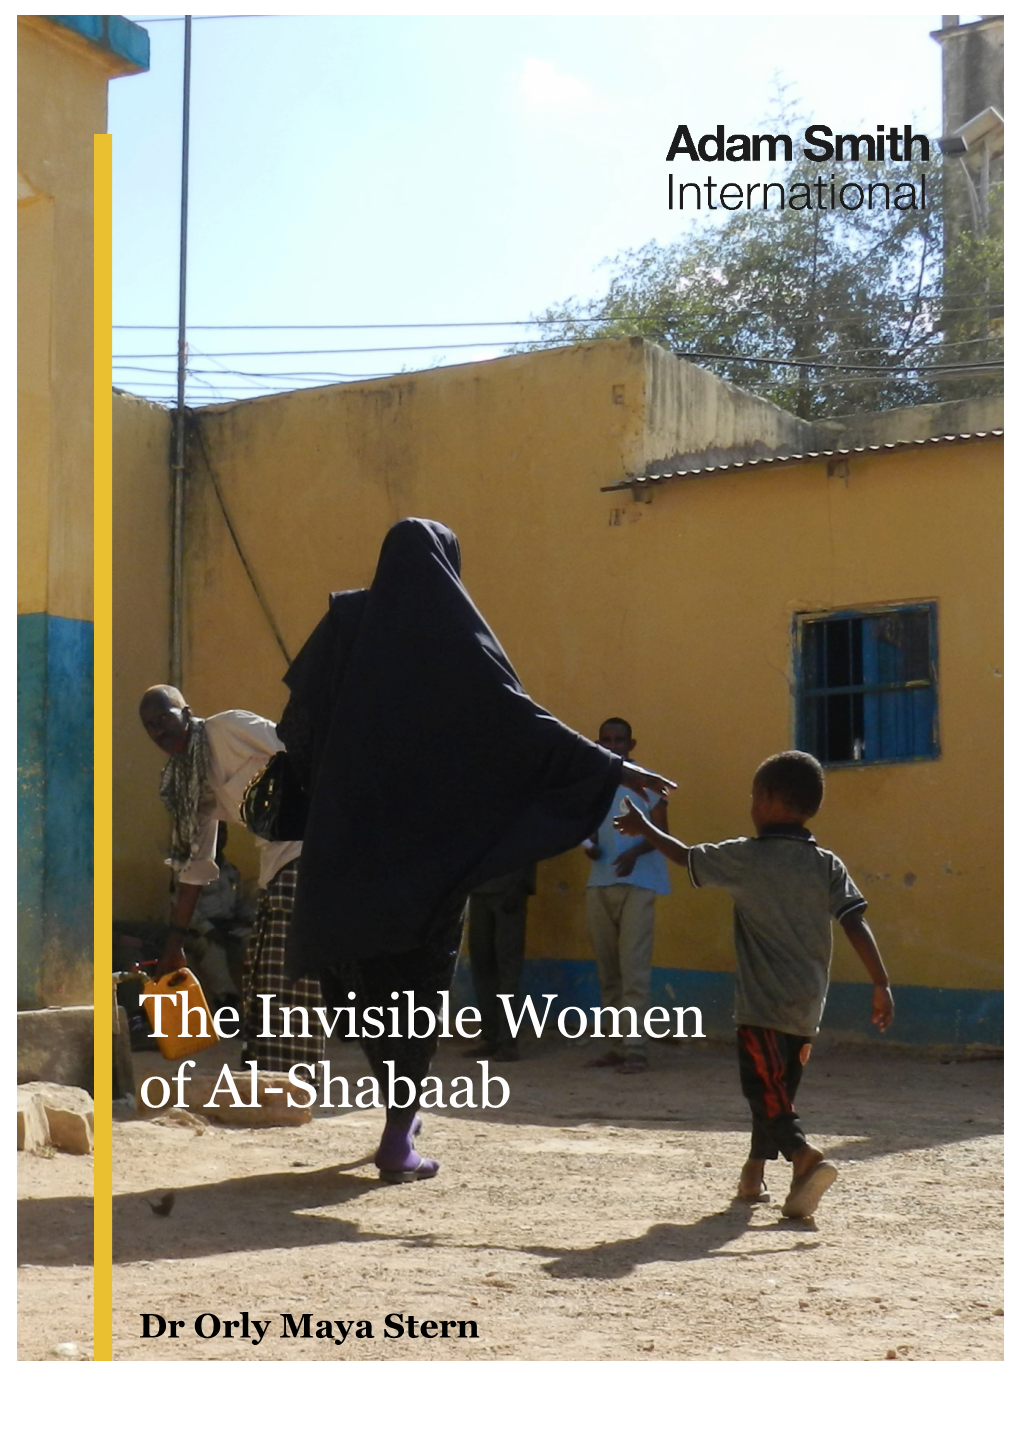 The Invisible Women of Al-Shabaab